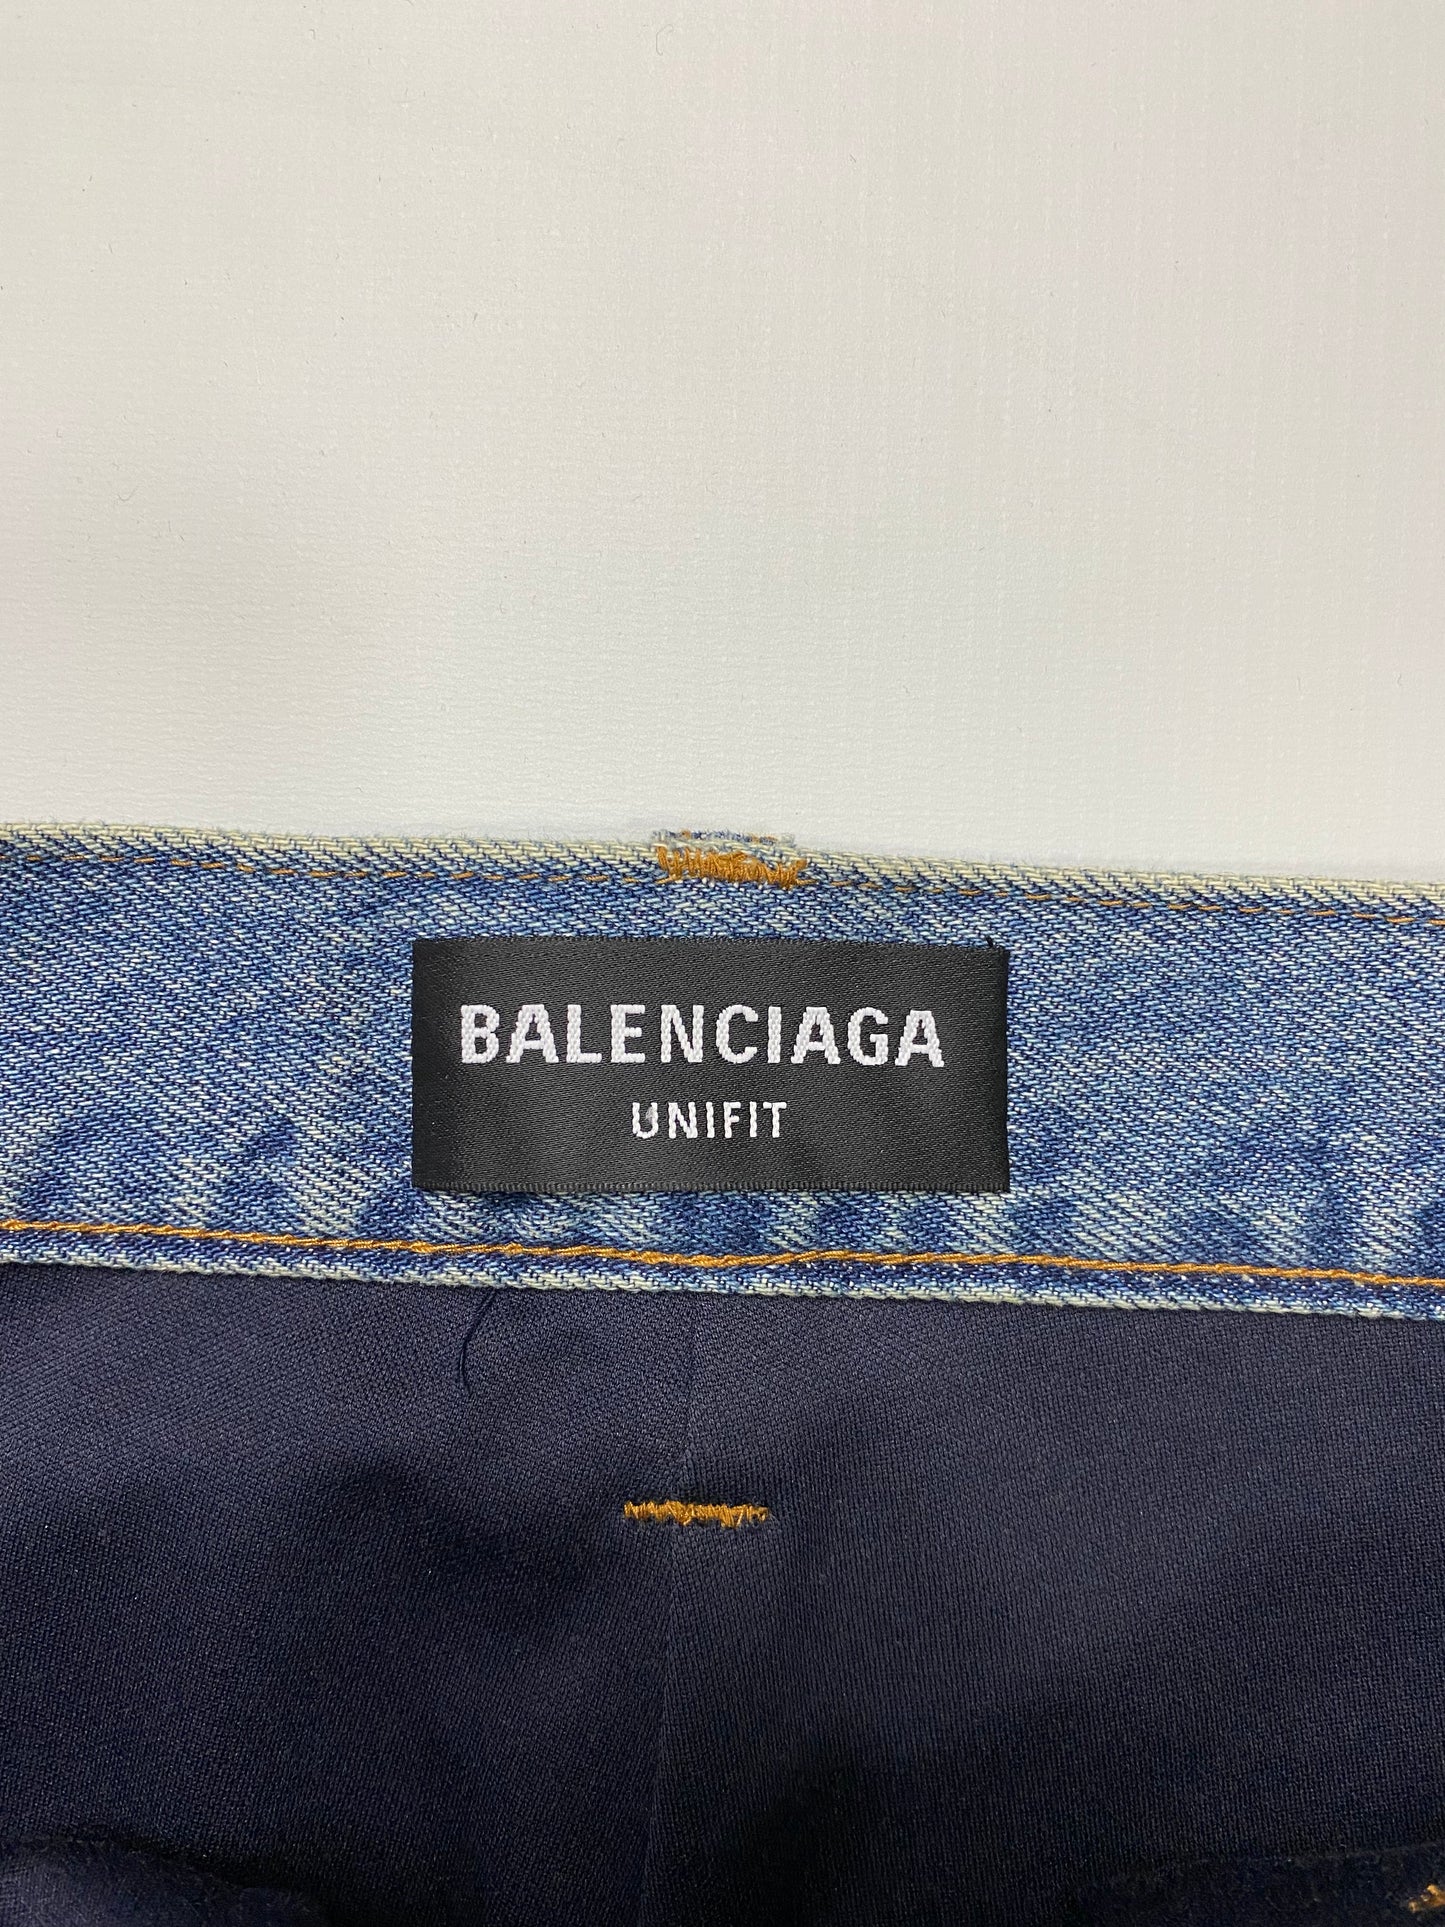 BALENCIAGA AW21 destroyed ripped layered baggy blue jeans SIZE:XS|S